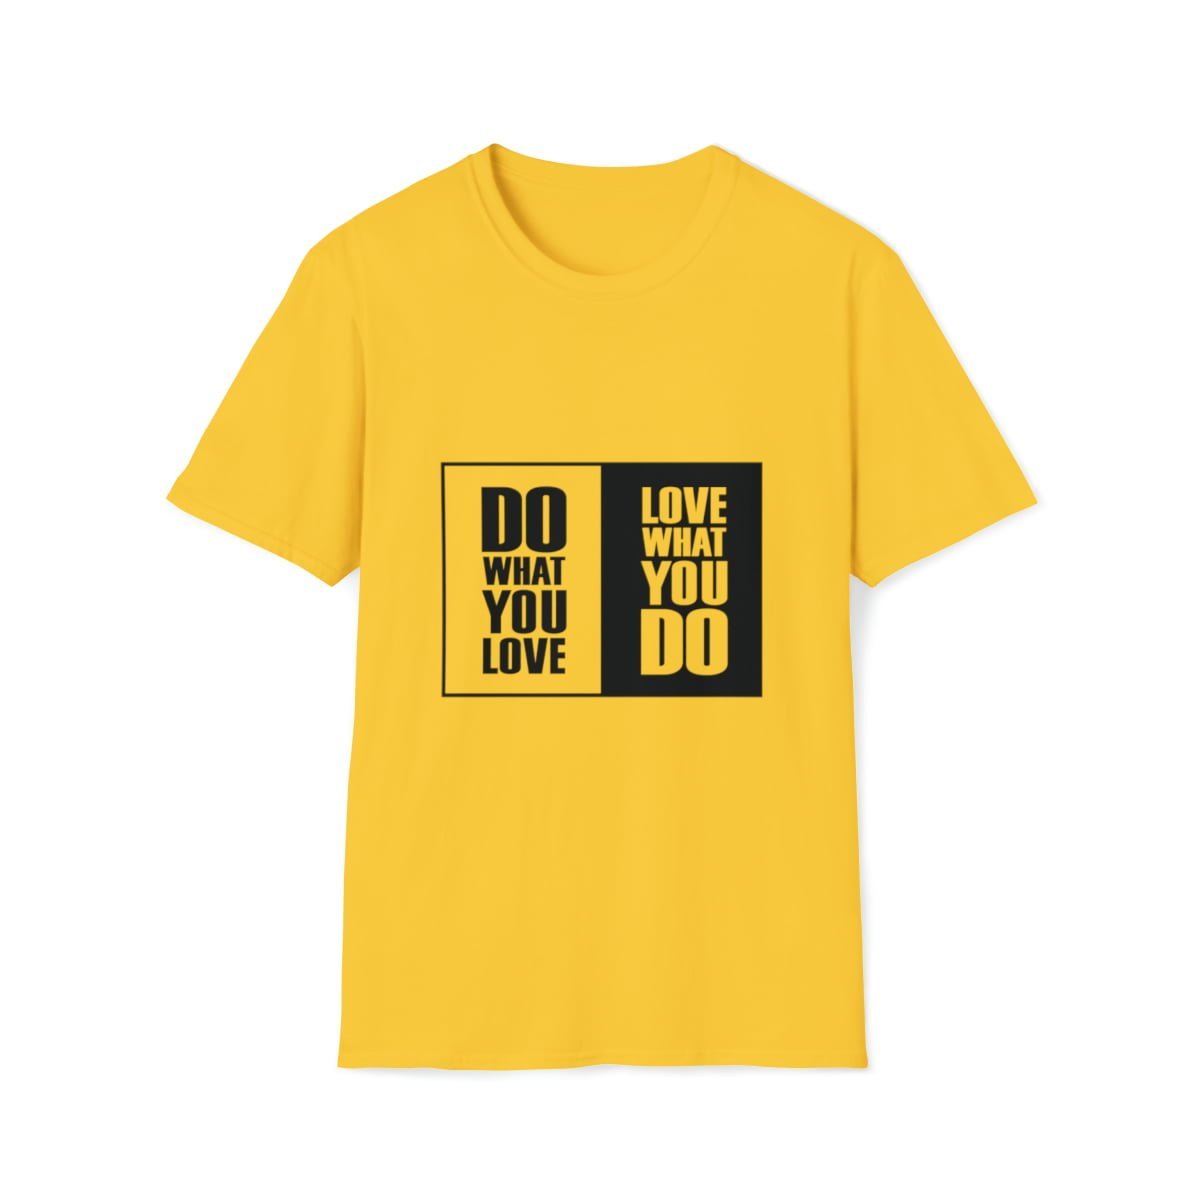 - Do What You Love T-shirt: Unisex Softstyle T-Shirt with Innovation quotes - NoowAI Shop